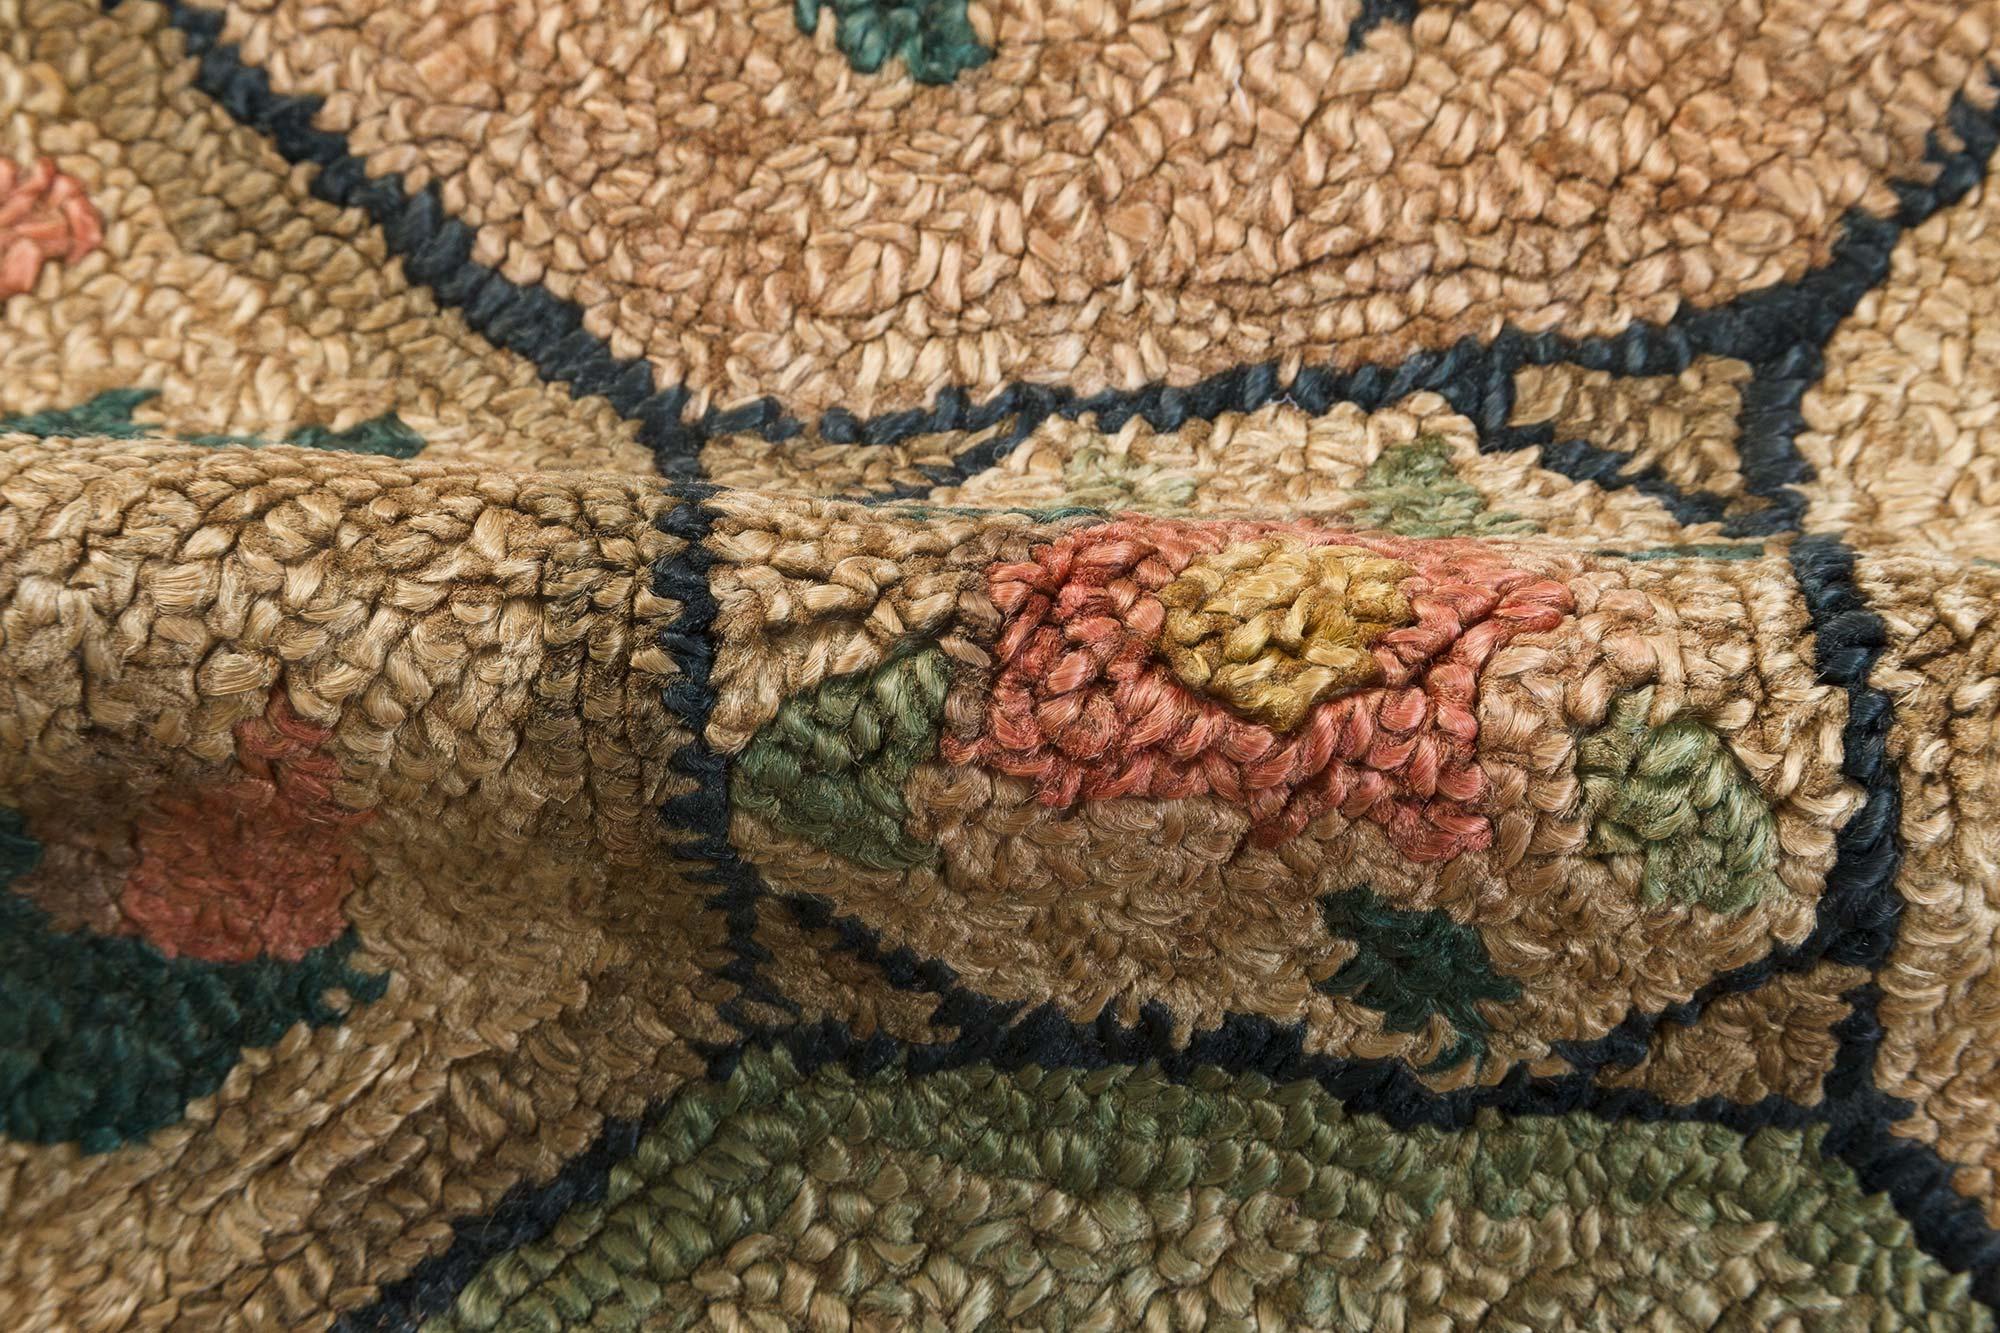 Midcentury floral American hooked rug
Size: 5'10